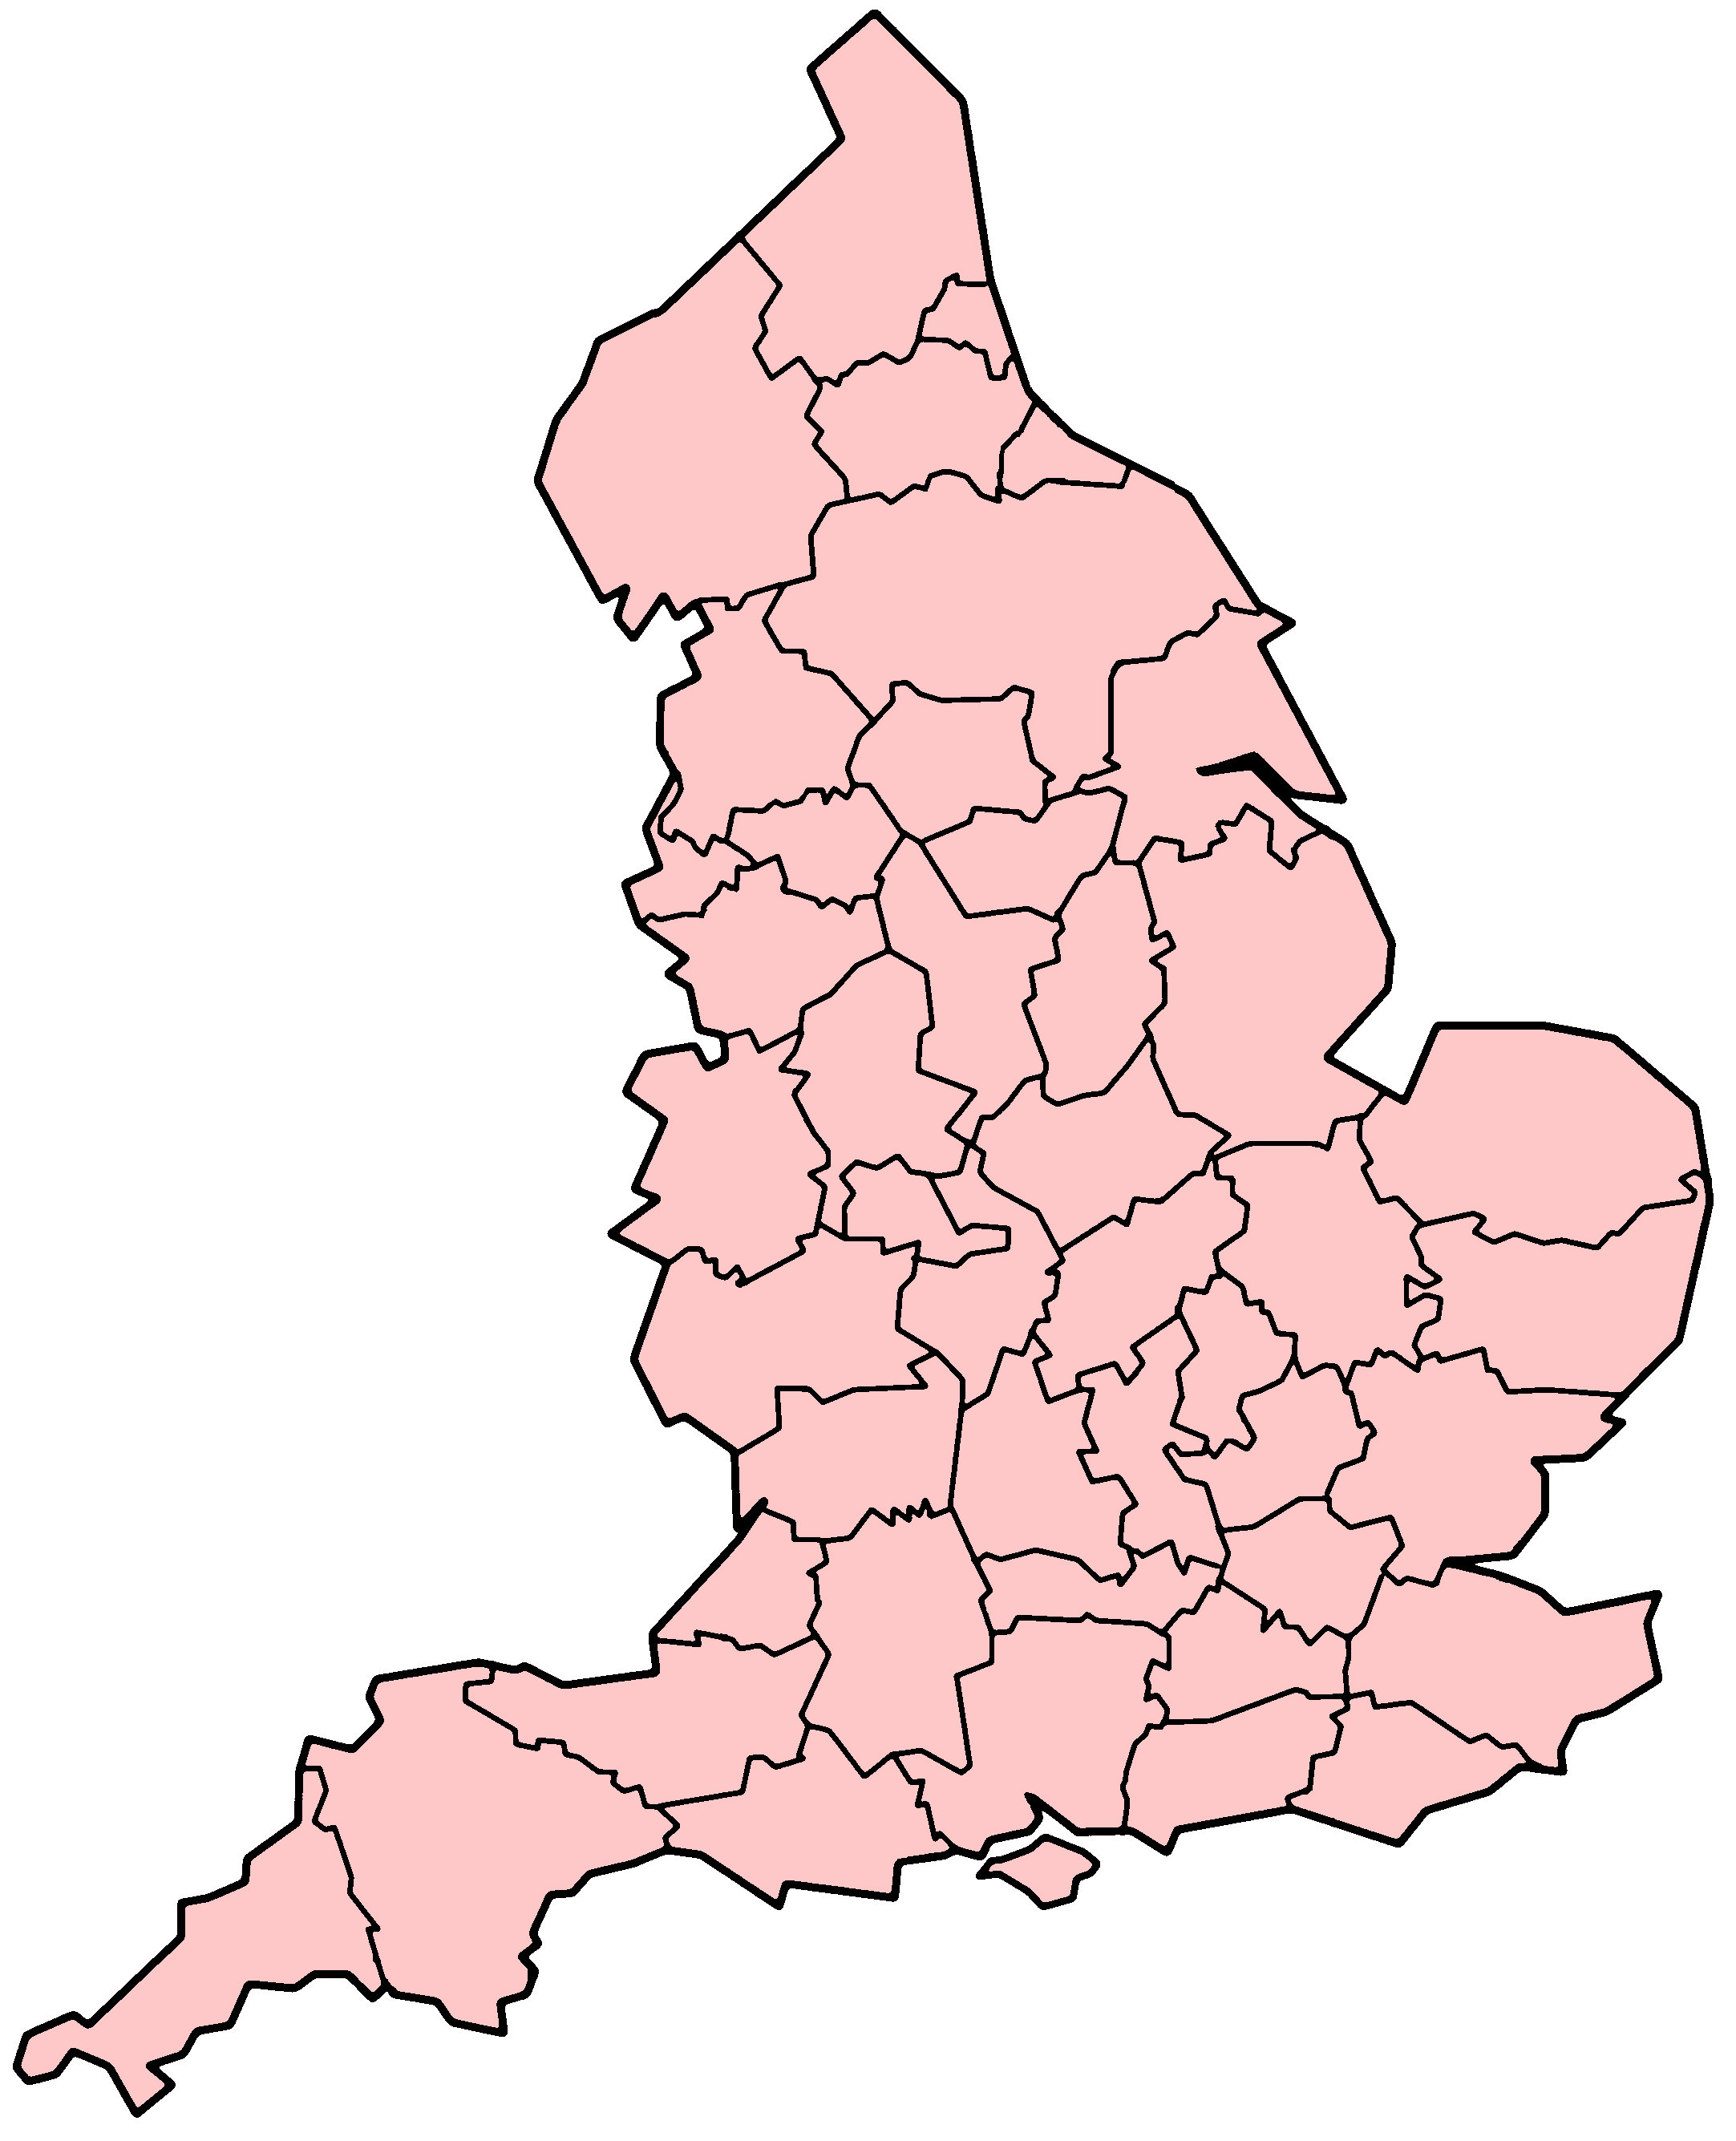 counties-of-england-map-quiz